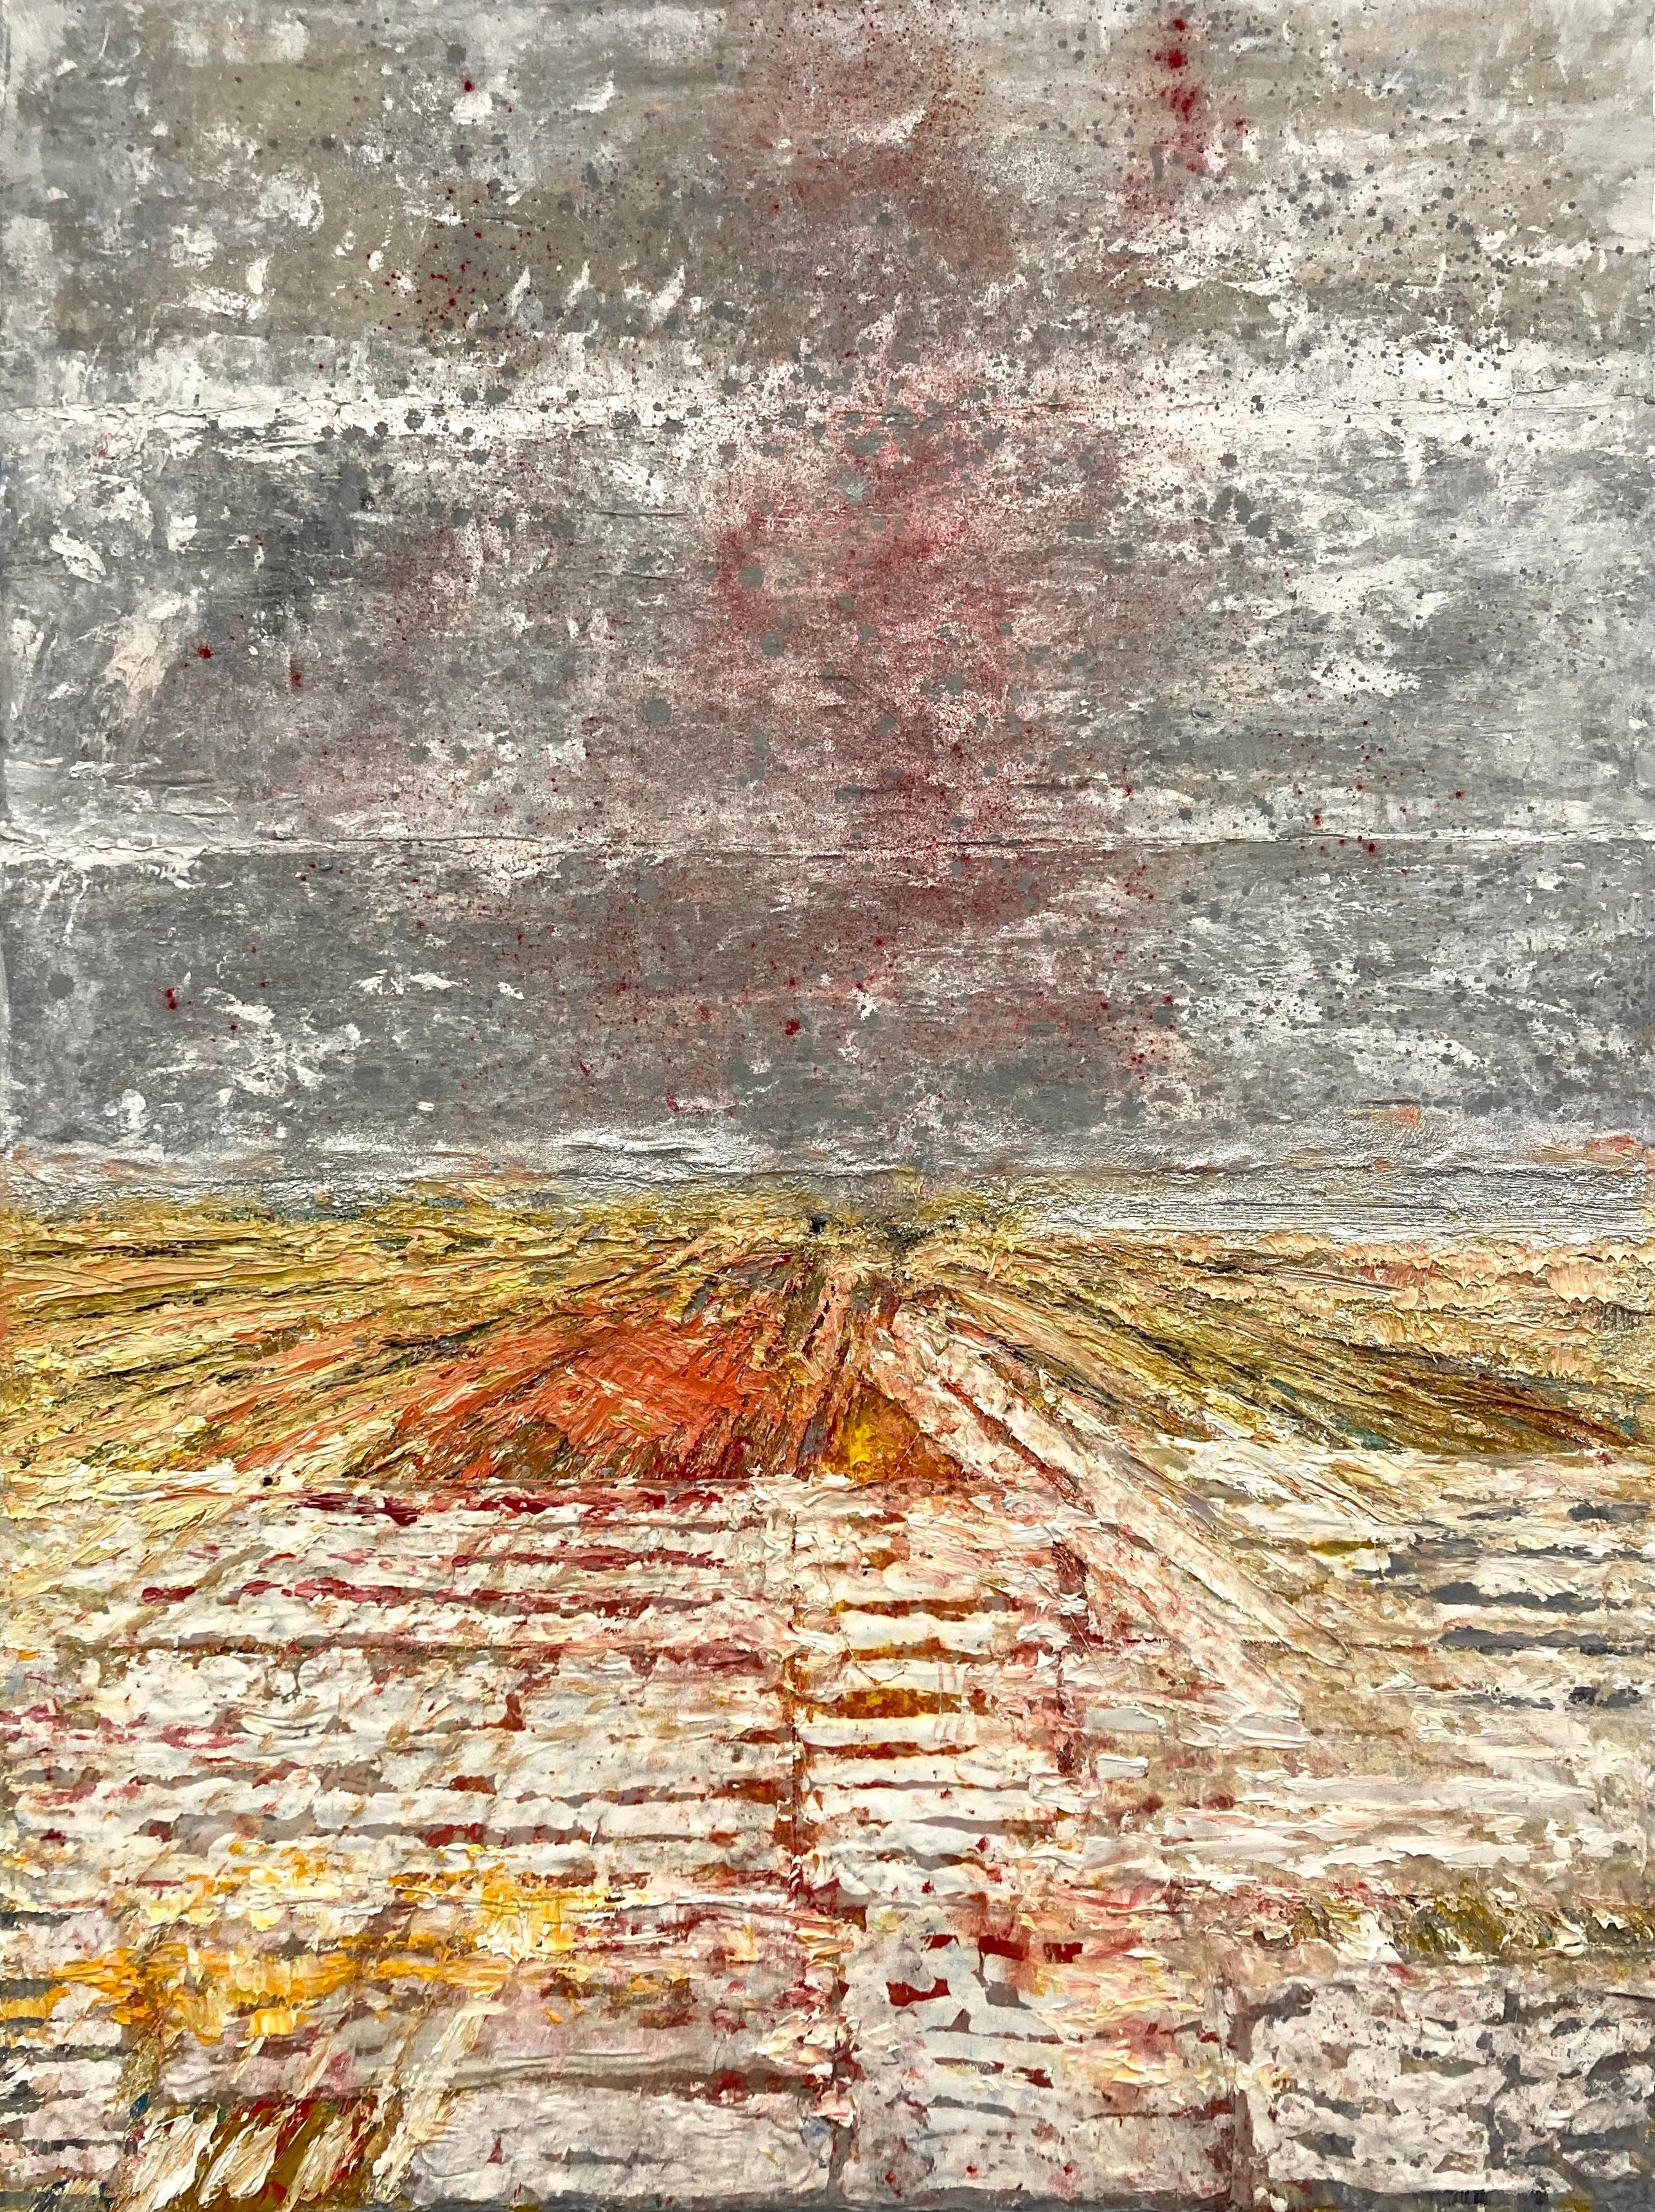 Annette Selle - "Be Lucky".

My theme in this painting is space and landscape and time. In an external reality that would correspond to this picture, there would be parallel arable furrows, indicated paths.
Their parallel courses would carry the